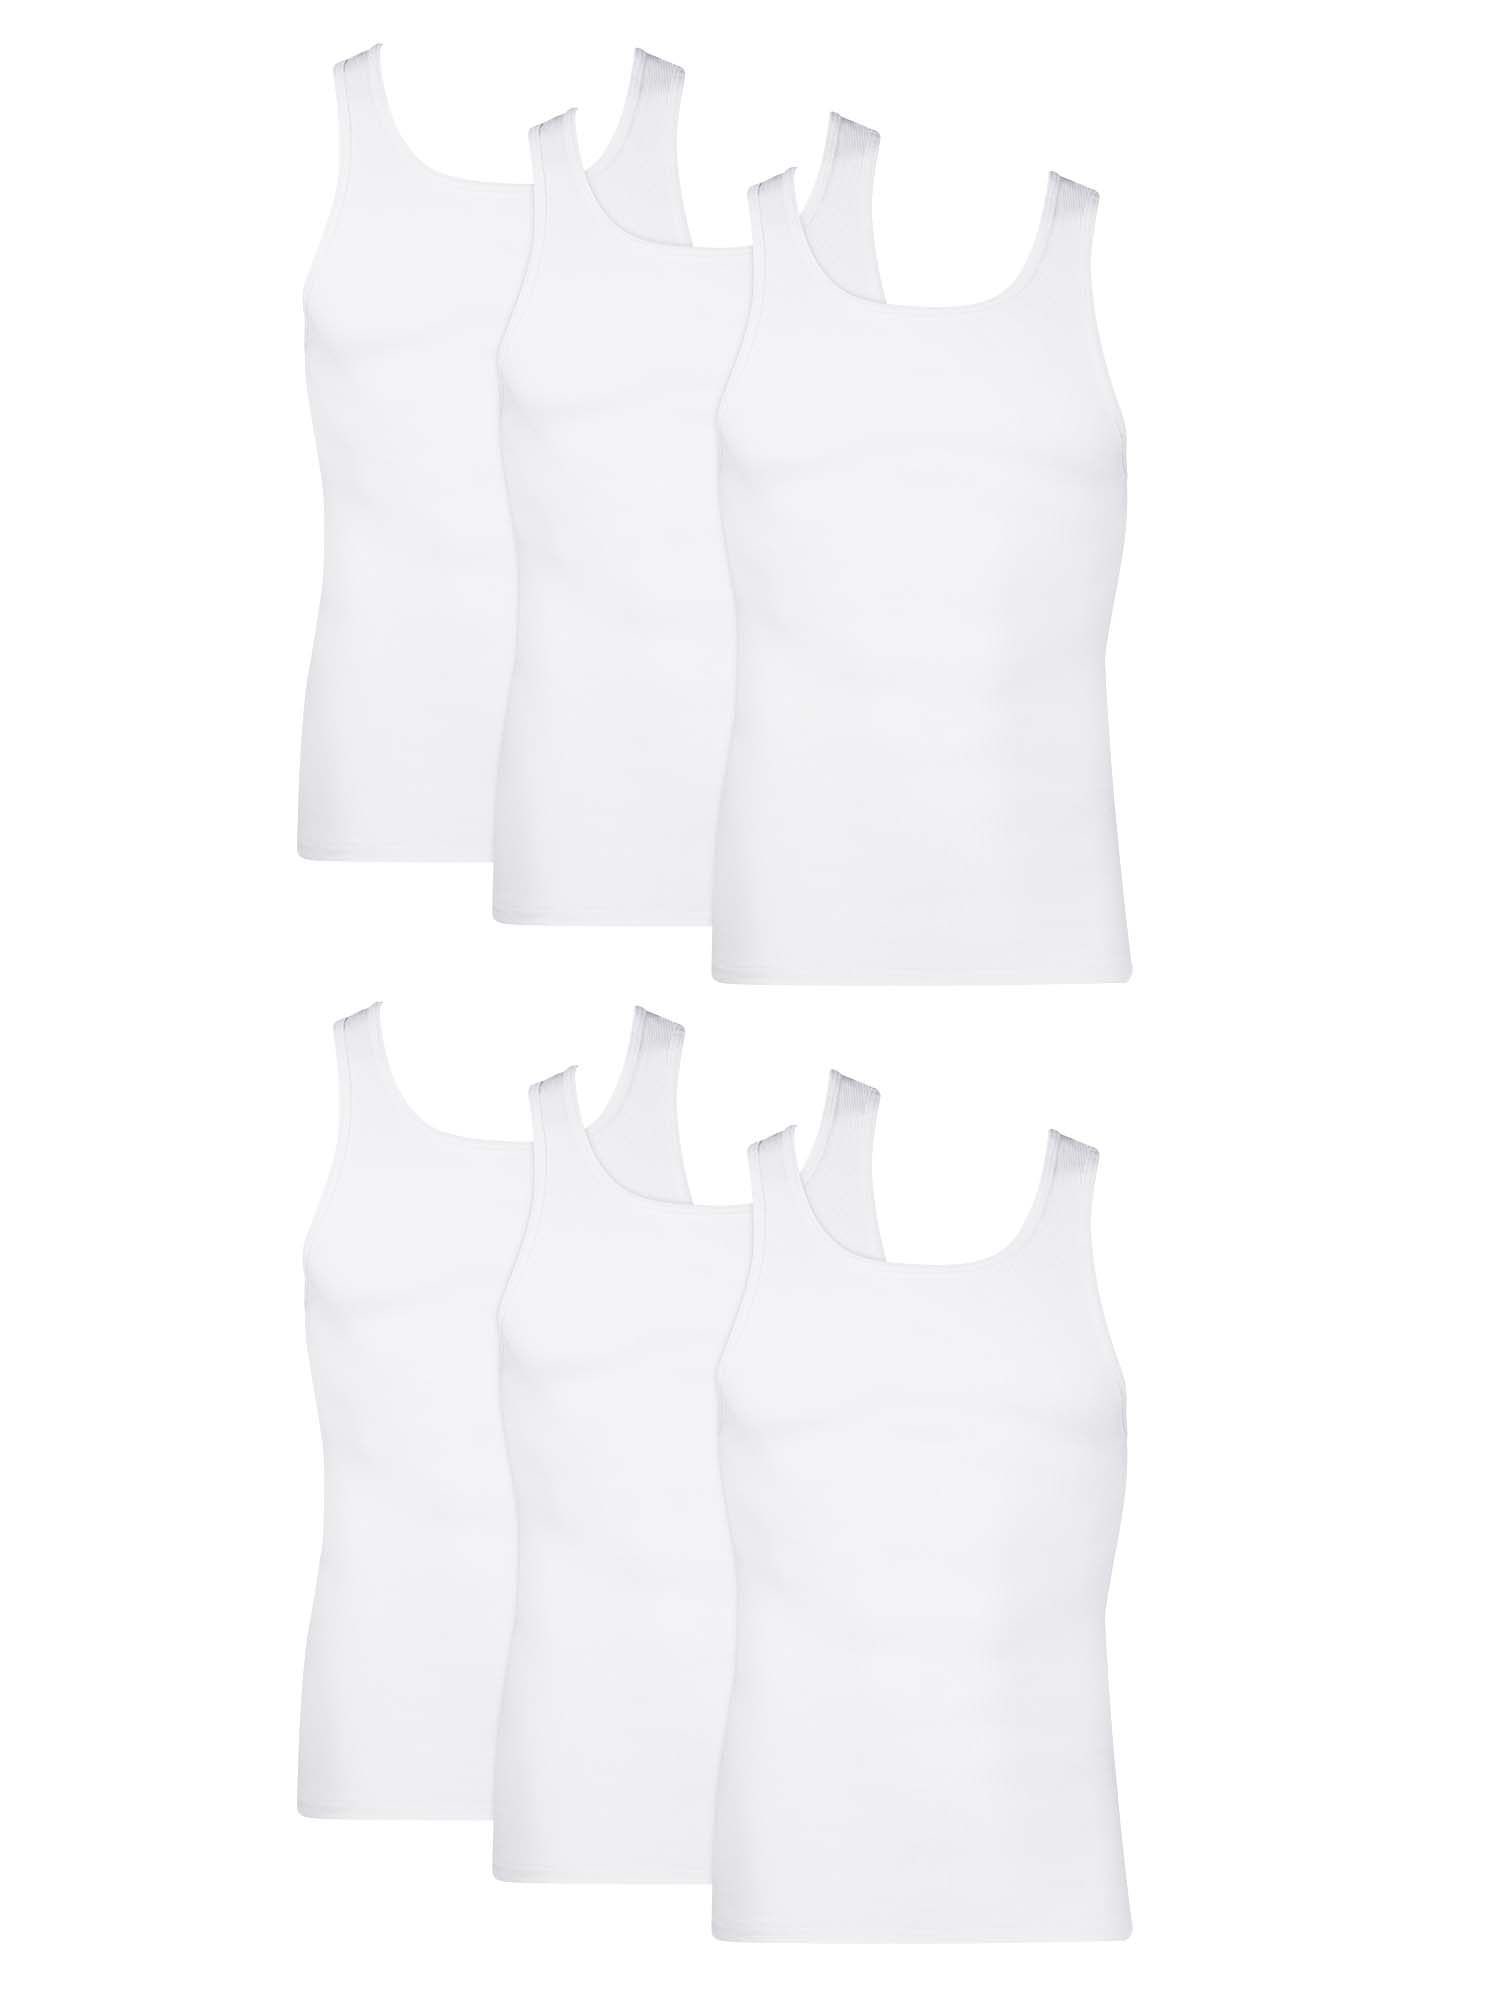 Hanes Men's Tank Top Undershirt Pack in White, Ribbed Moisture-Wicking Cotton, 6-Pack - image 1 of 10